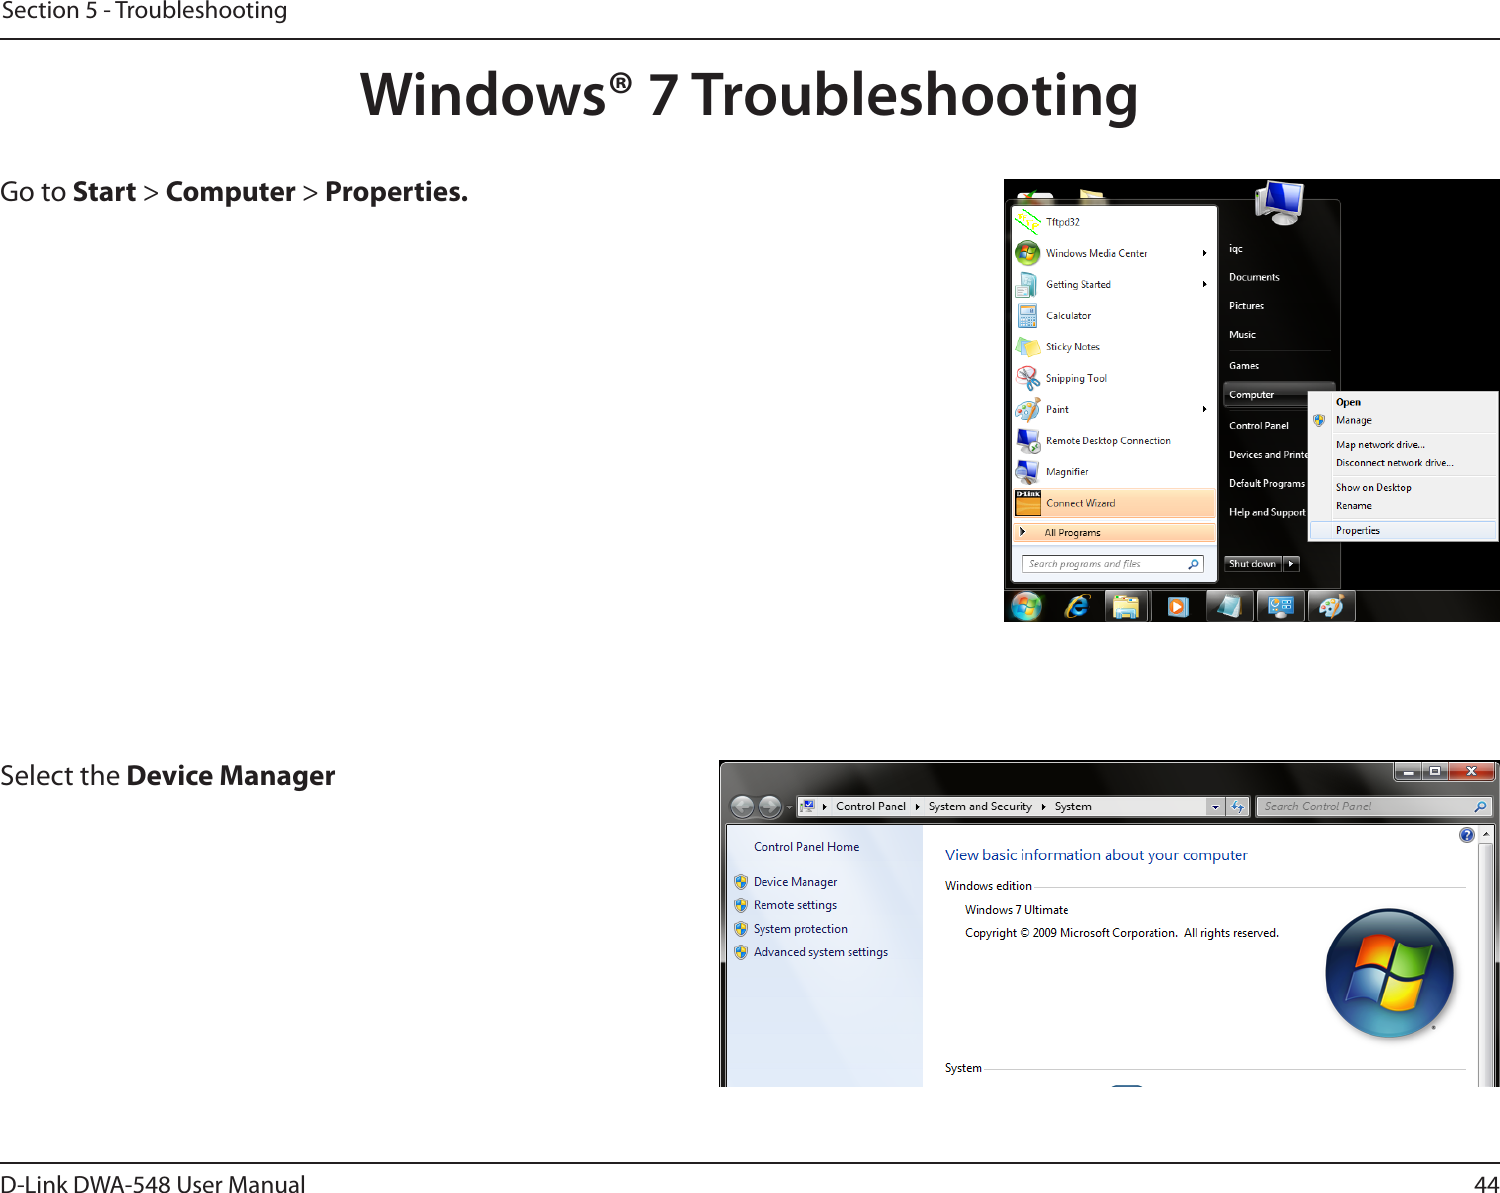 44D-Link DWA-548 User ManualSection 5 - TroubleshootingWindows® 7 TroubleshootingGo to Start &gt; Computer &gt; Properties.Select the Device Manager